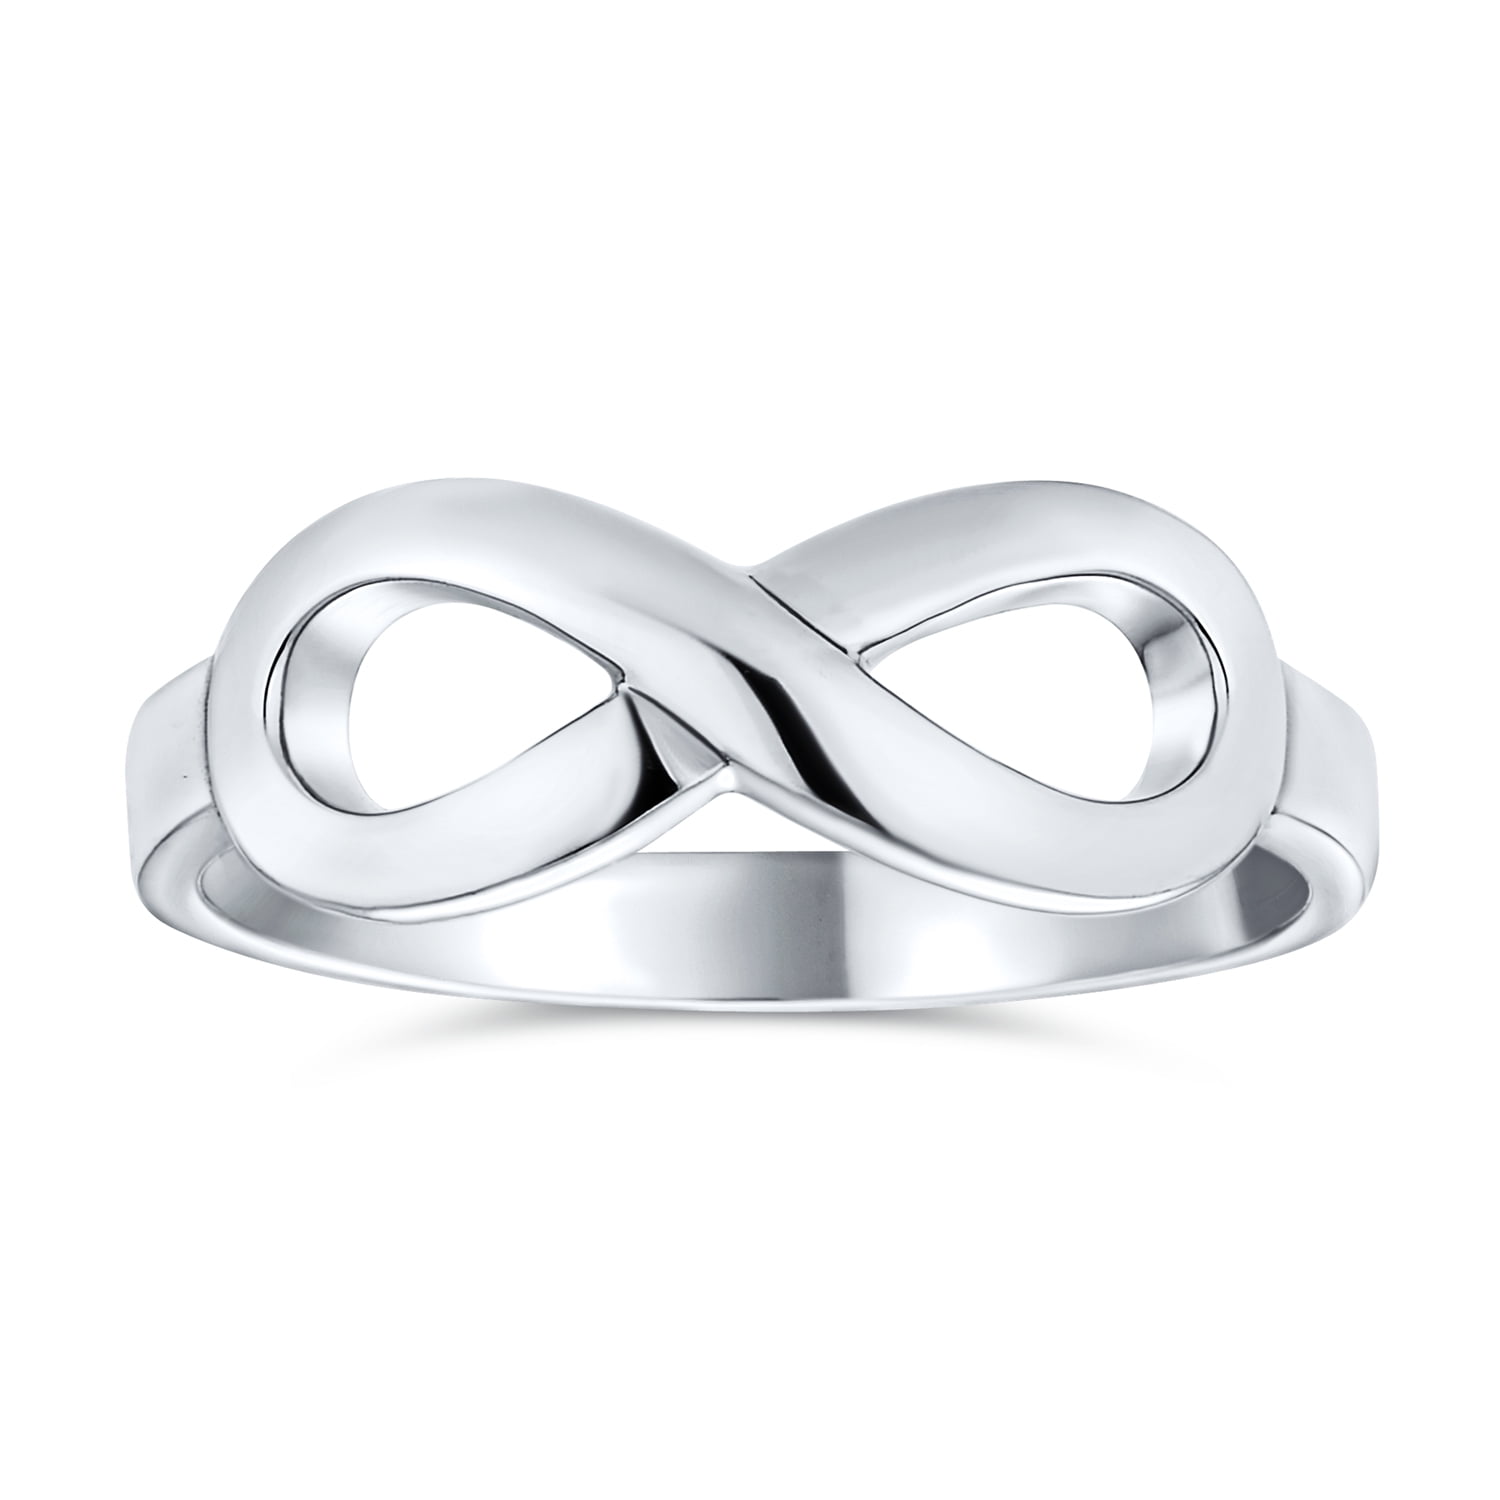 Best Friends BFF Love Knot Infinity Band Ring For Girlfriend For Teen Oxidized 925 Sterling Silver